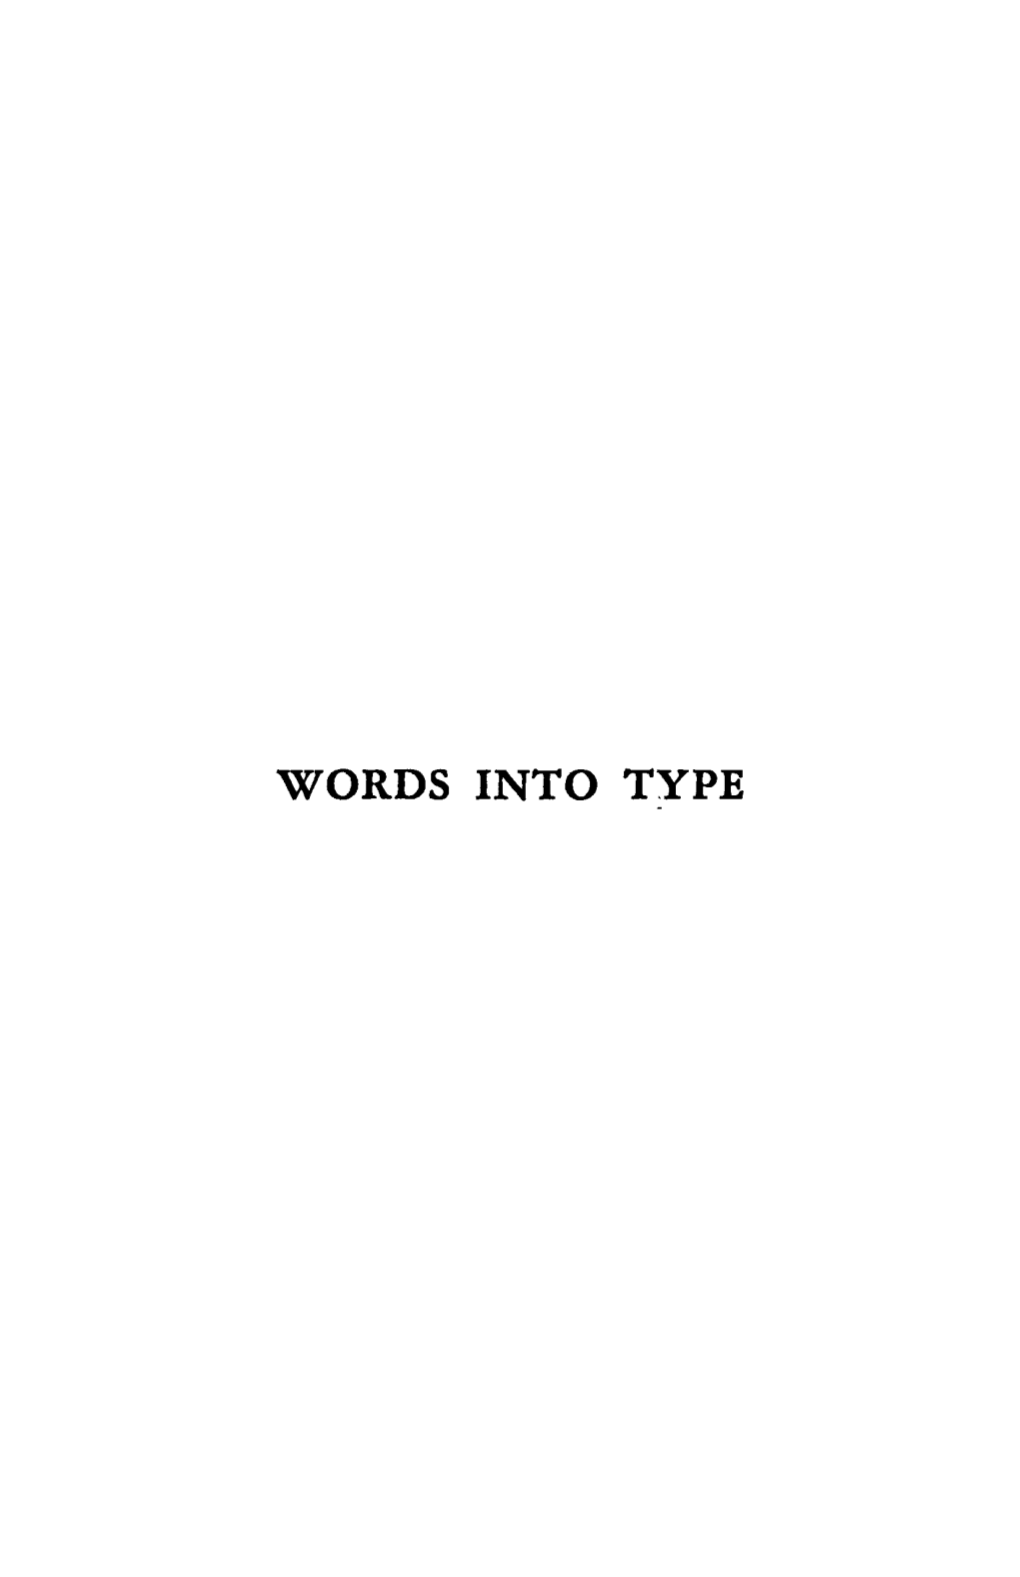 Words Into Type a Guide in the Preparation of Manuscripts; for Writers, Editors, Proofreaders and Printers Words ' Into Type